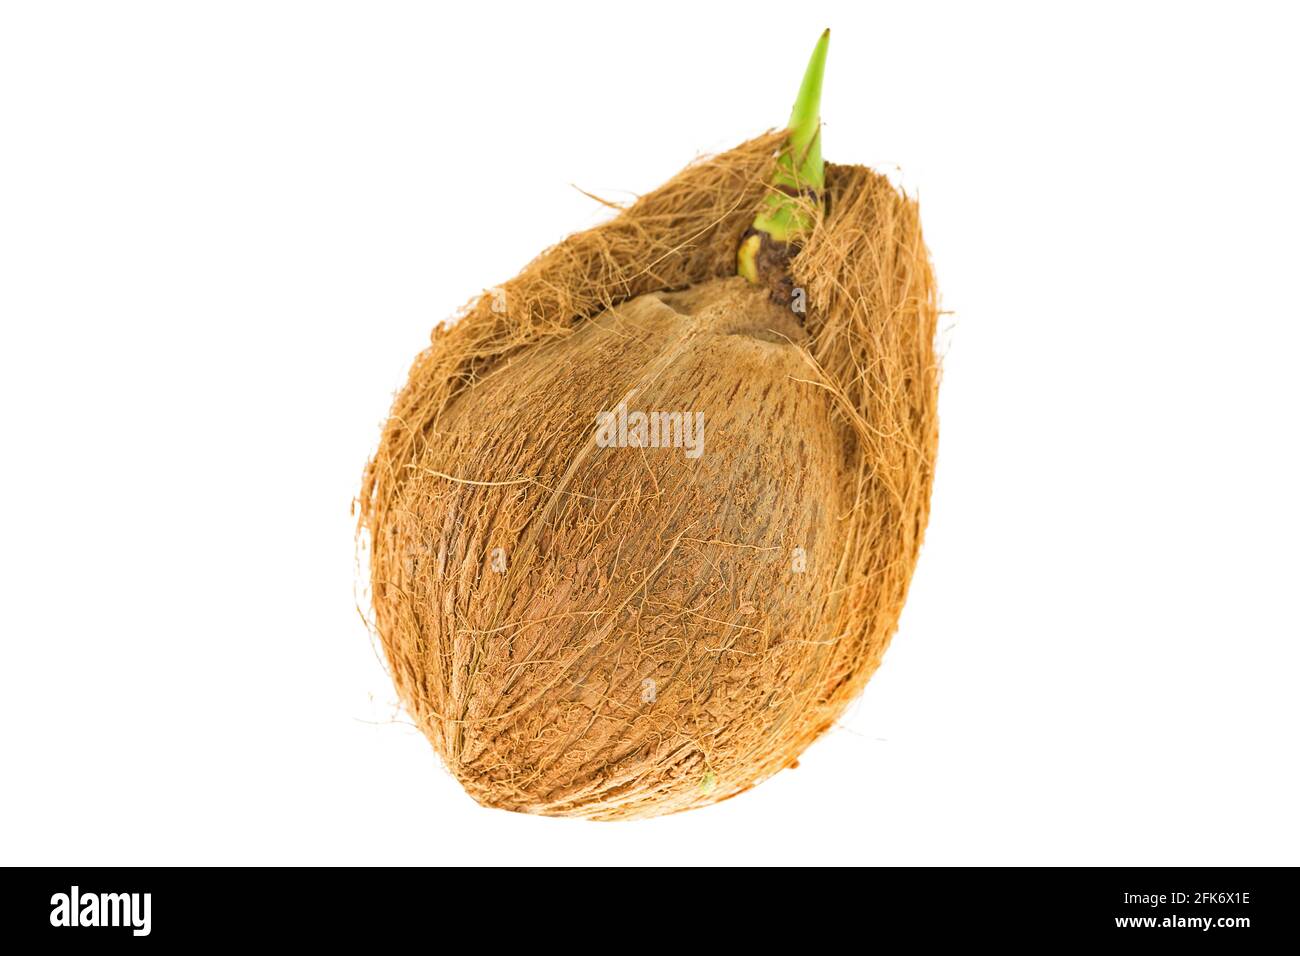 Old mature raw coconut shell with brown fiber and green sprout isolated on white background Stock Photo